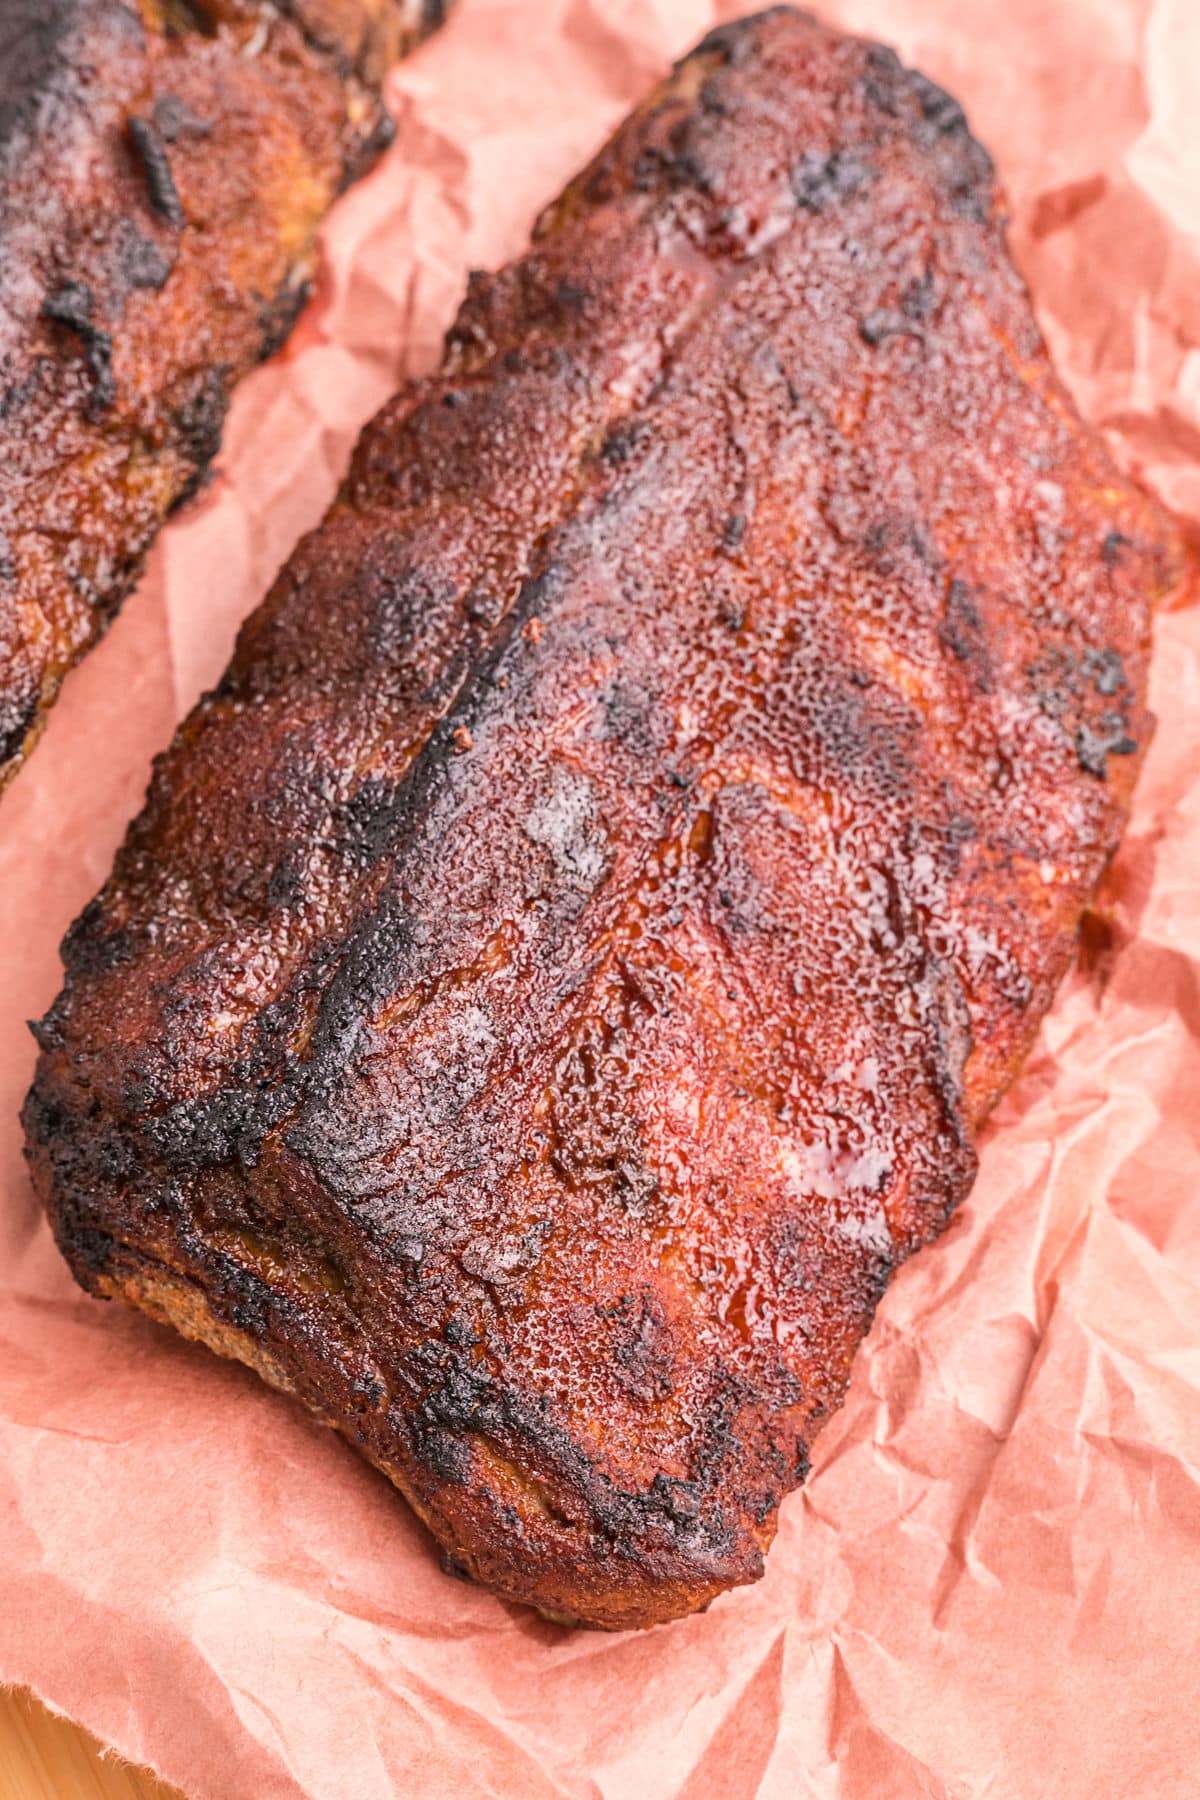 cooked rack of ribs on paper.